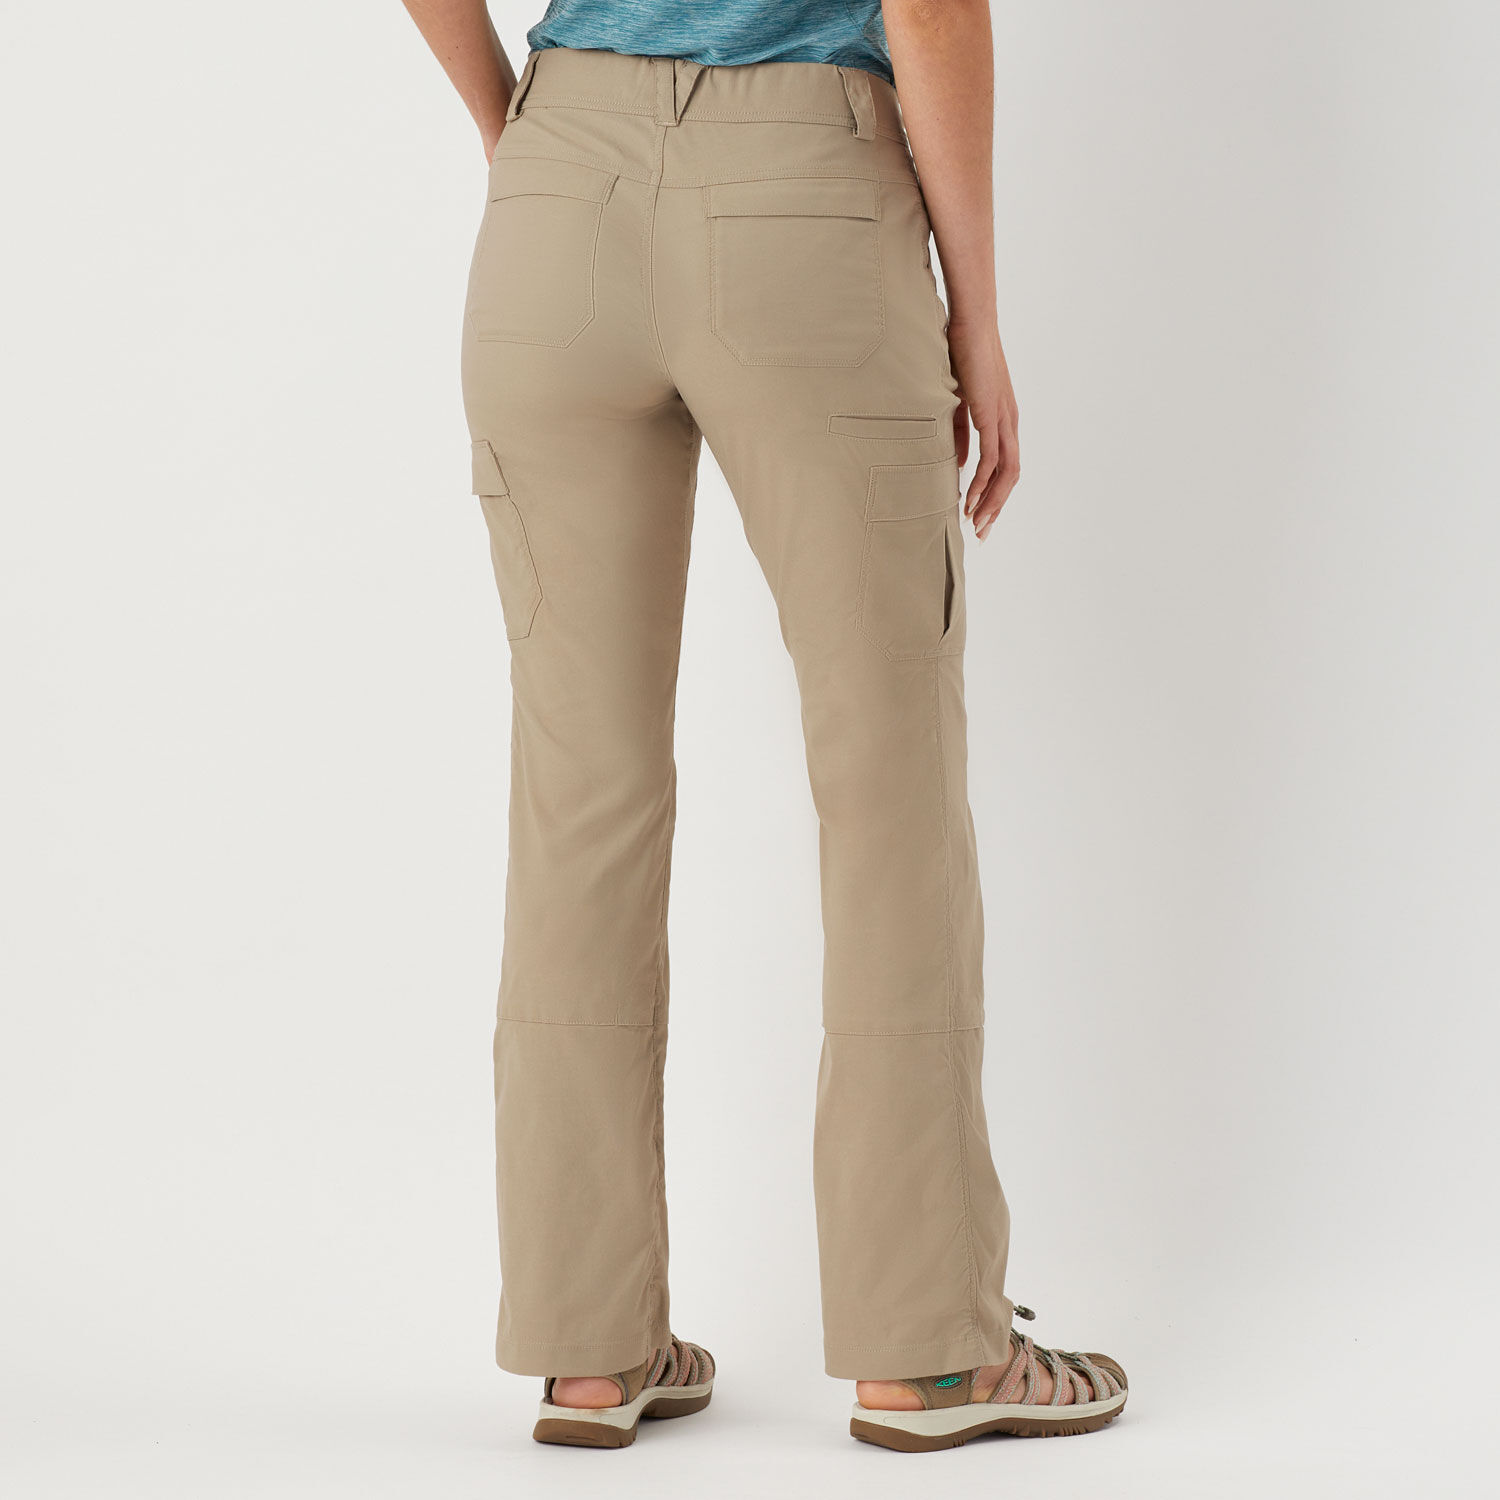 Women's Pants, Jeans, Trackpants | Cotton On New Zealand